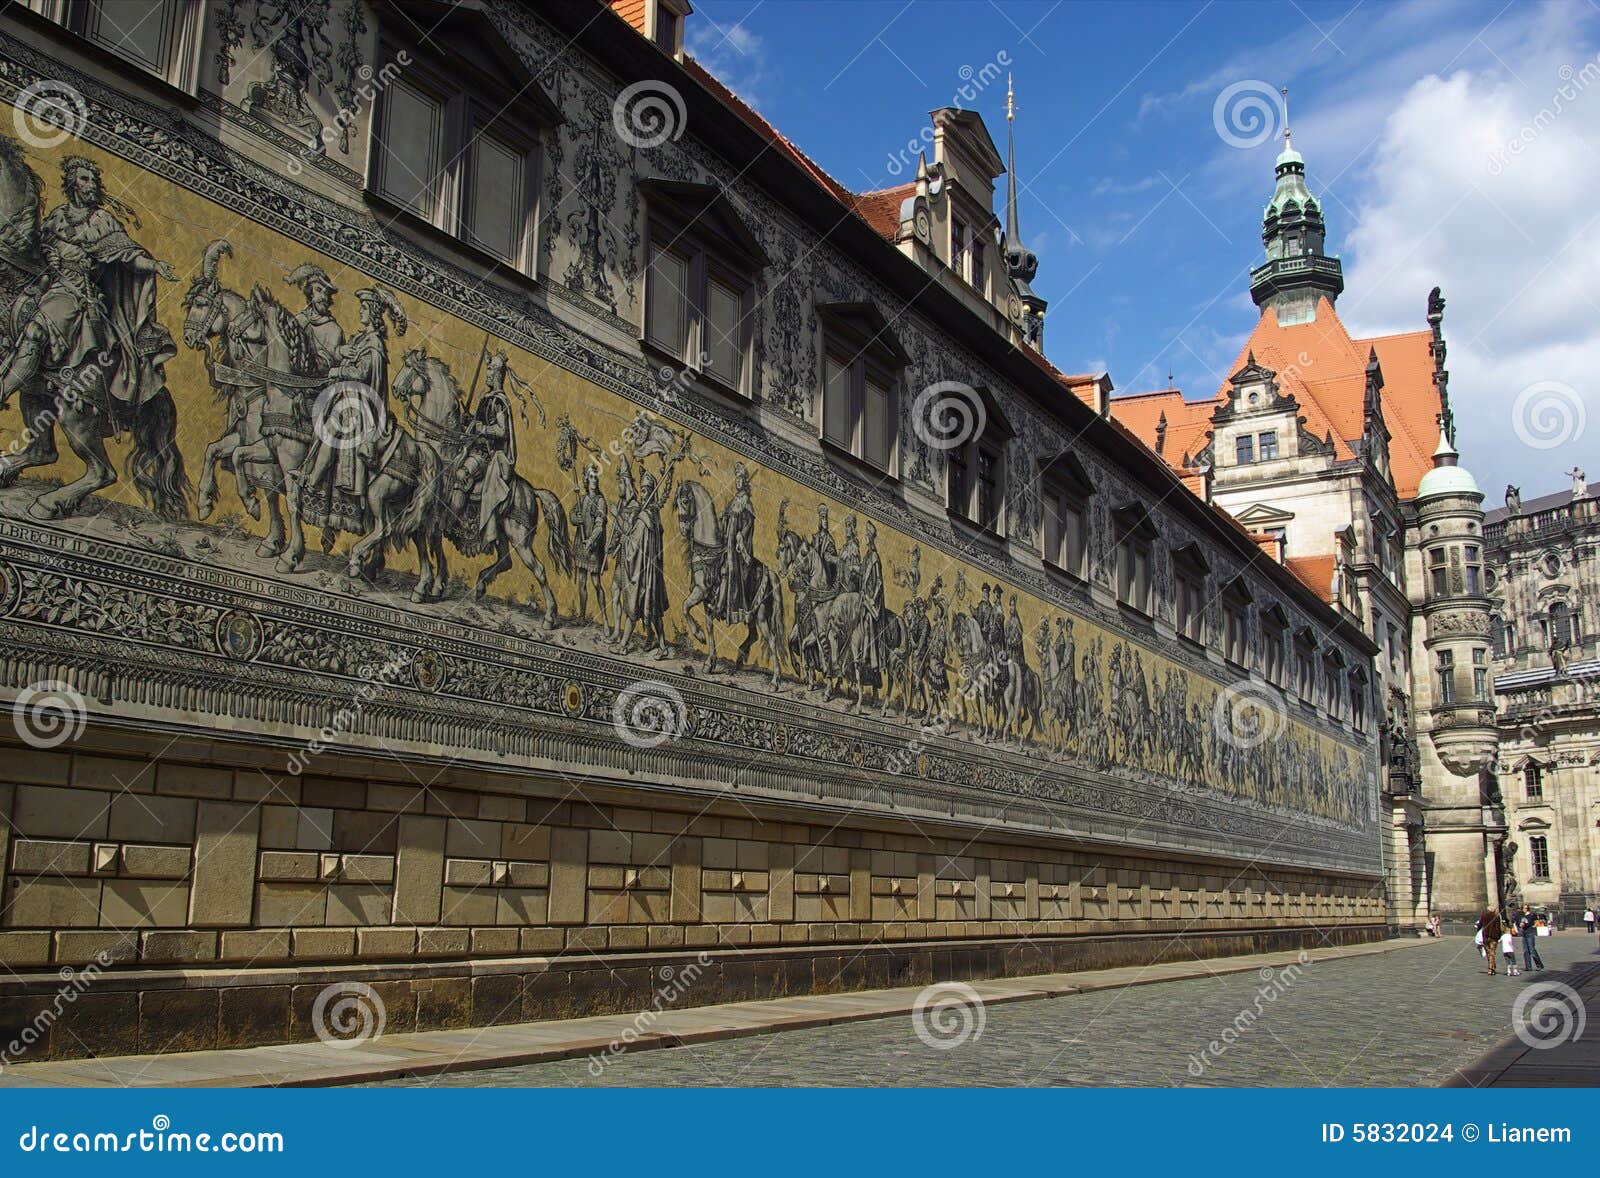 dresden procession of princes